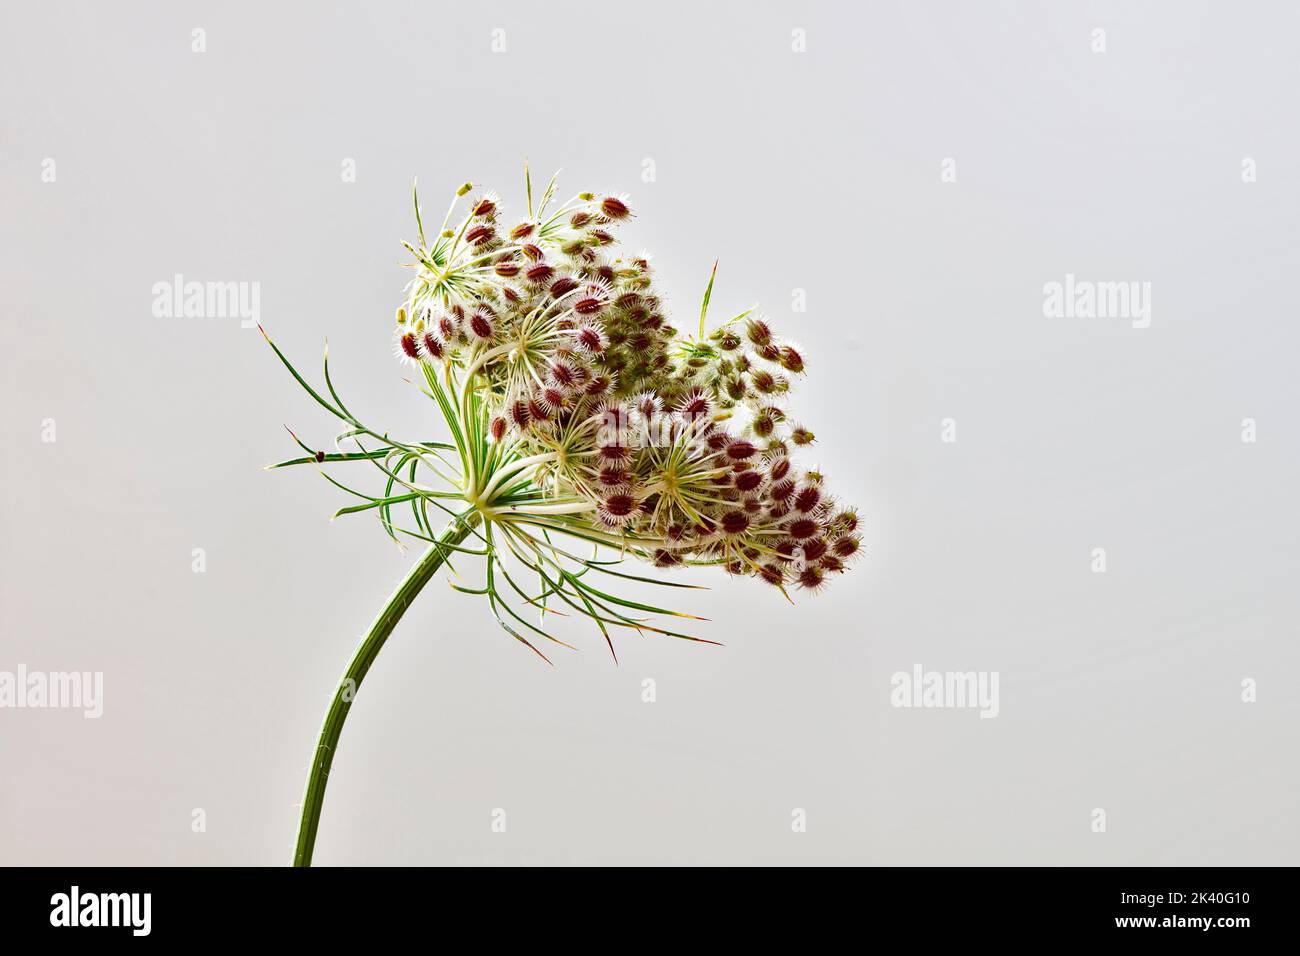 Queen Anne's lace, wild carrot (Daucus carota), fruiting inflorescence, Germany Stock Photo